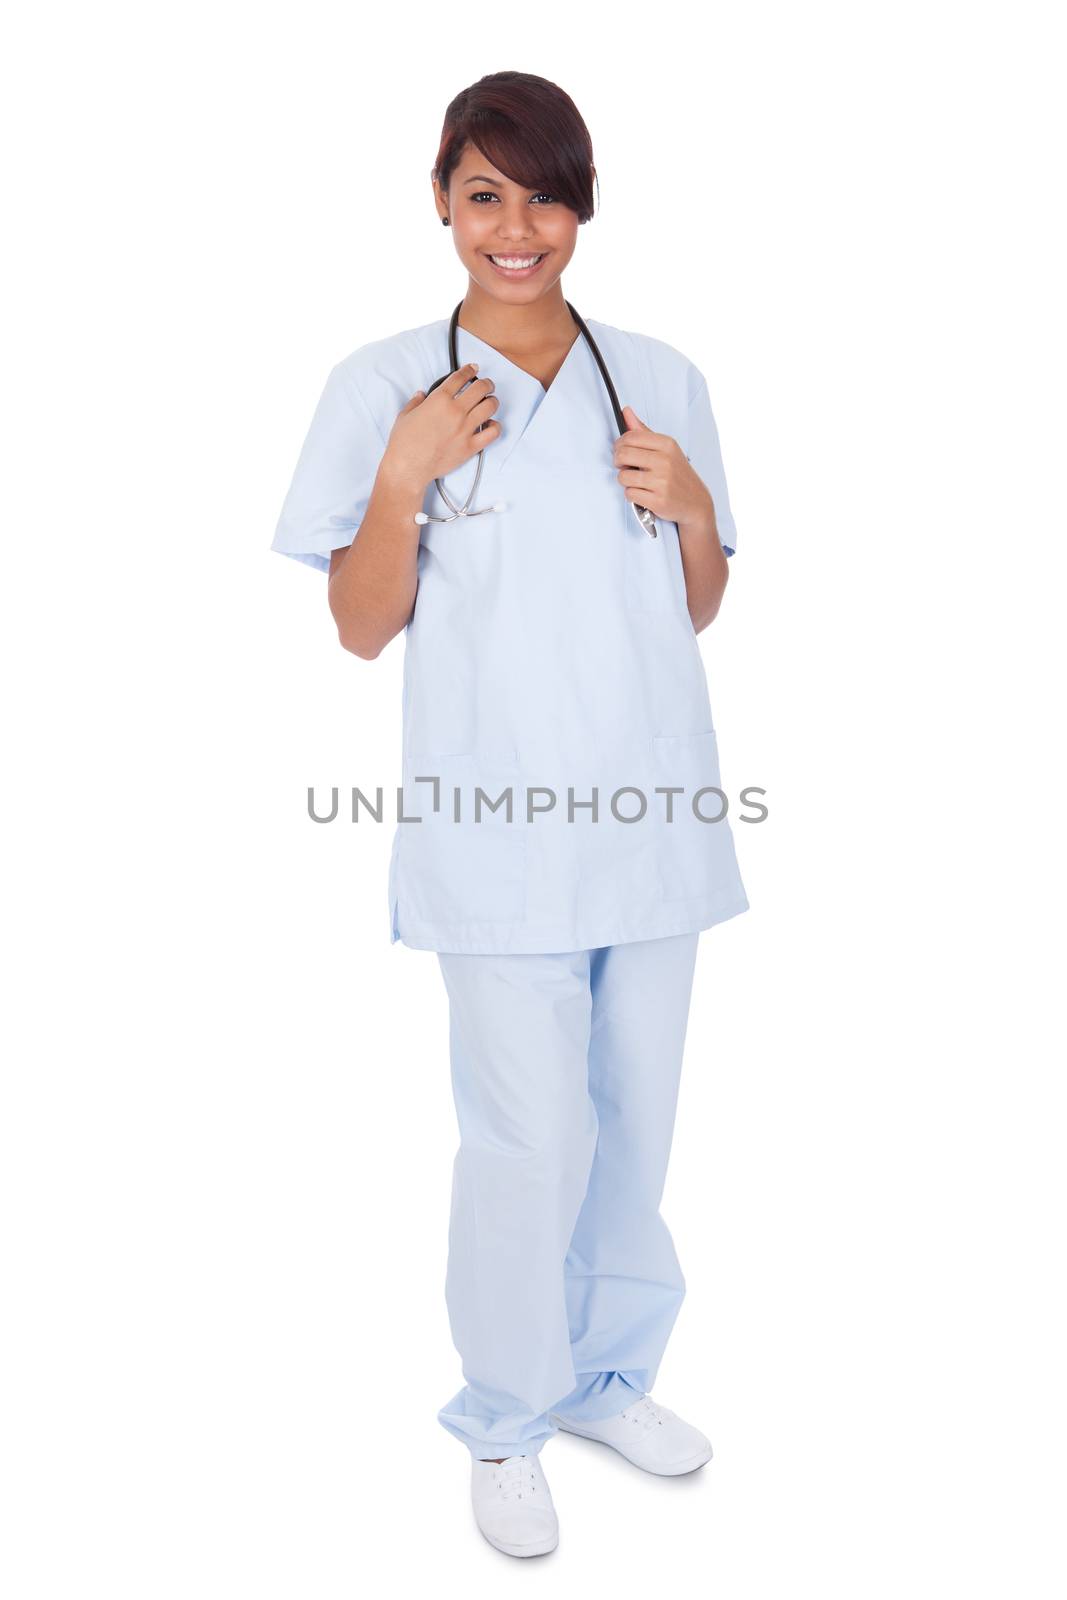 Smiling medical doctor woman with stethoscope by AndreyPopov